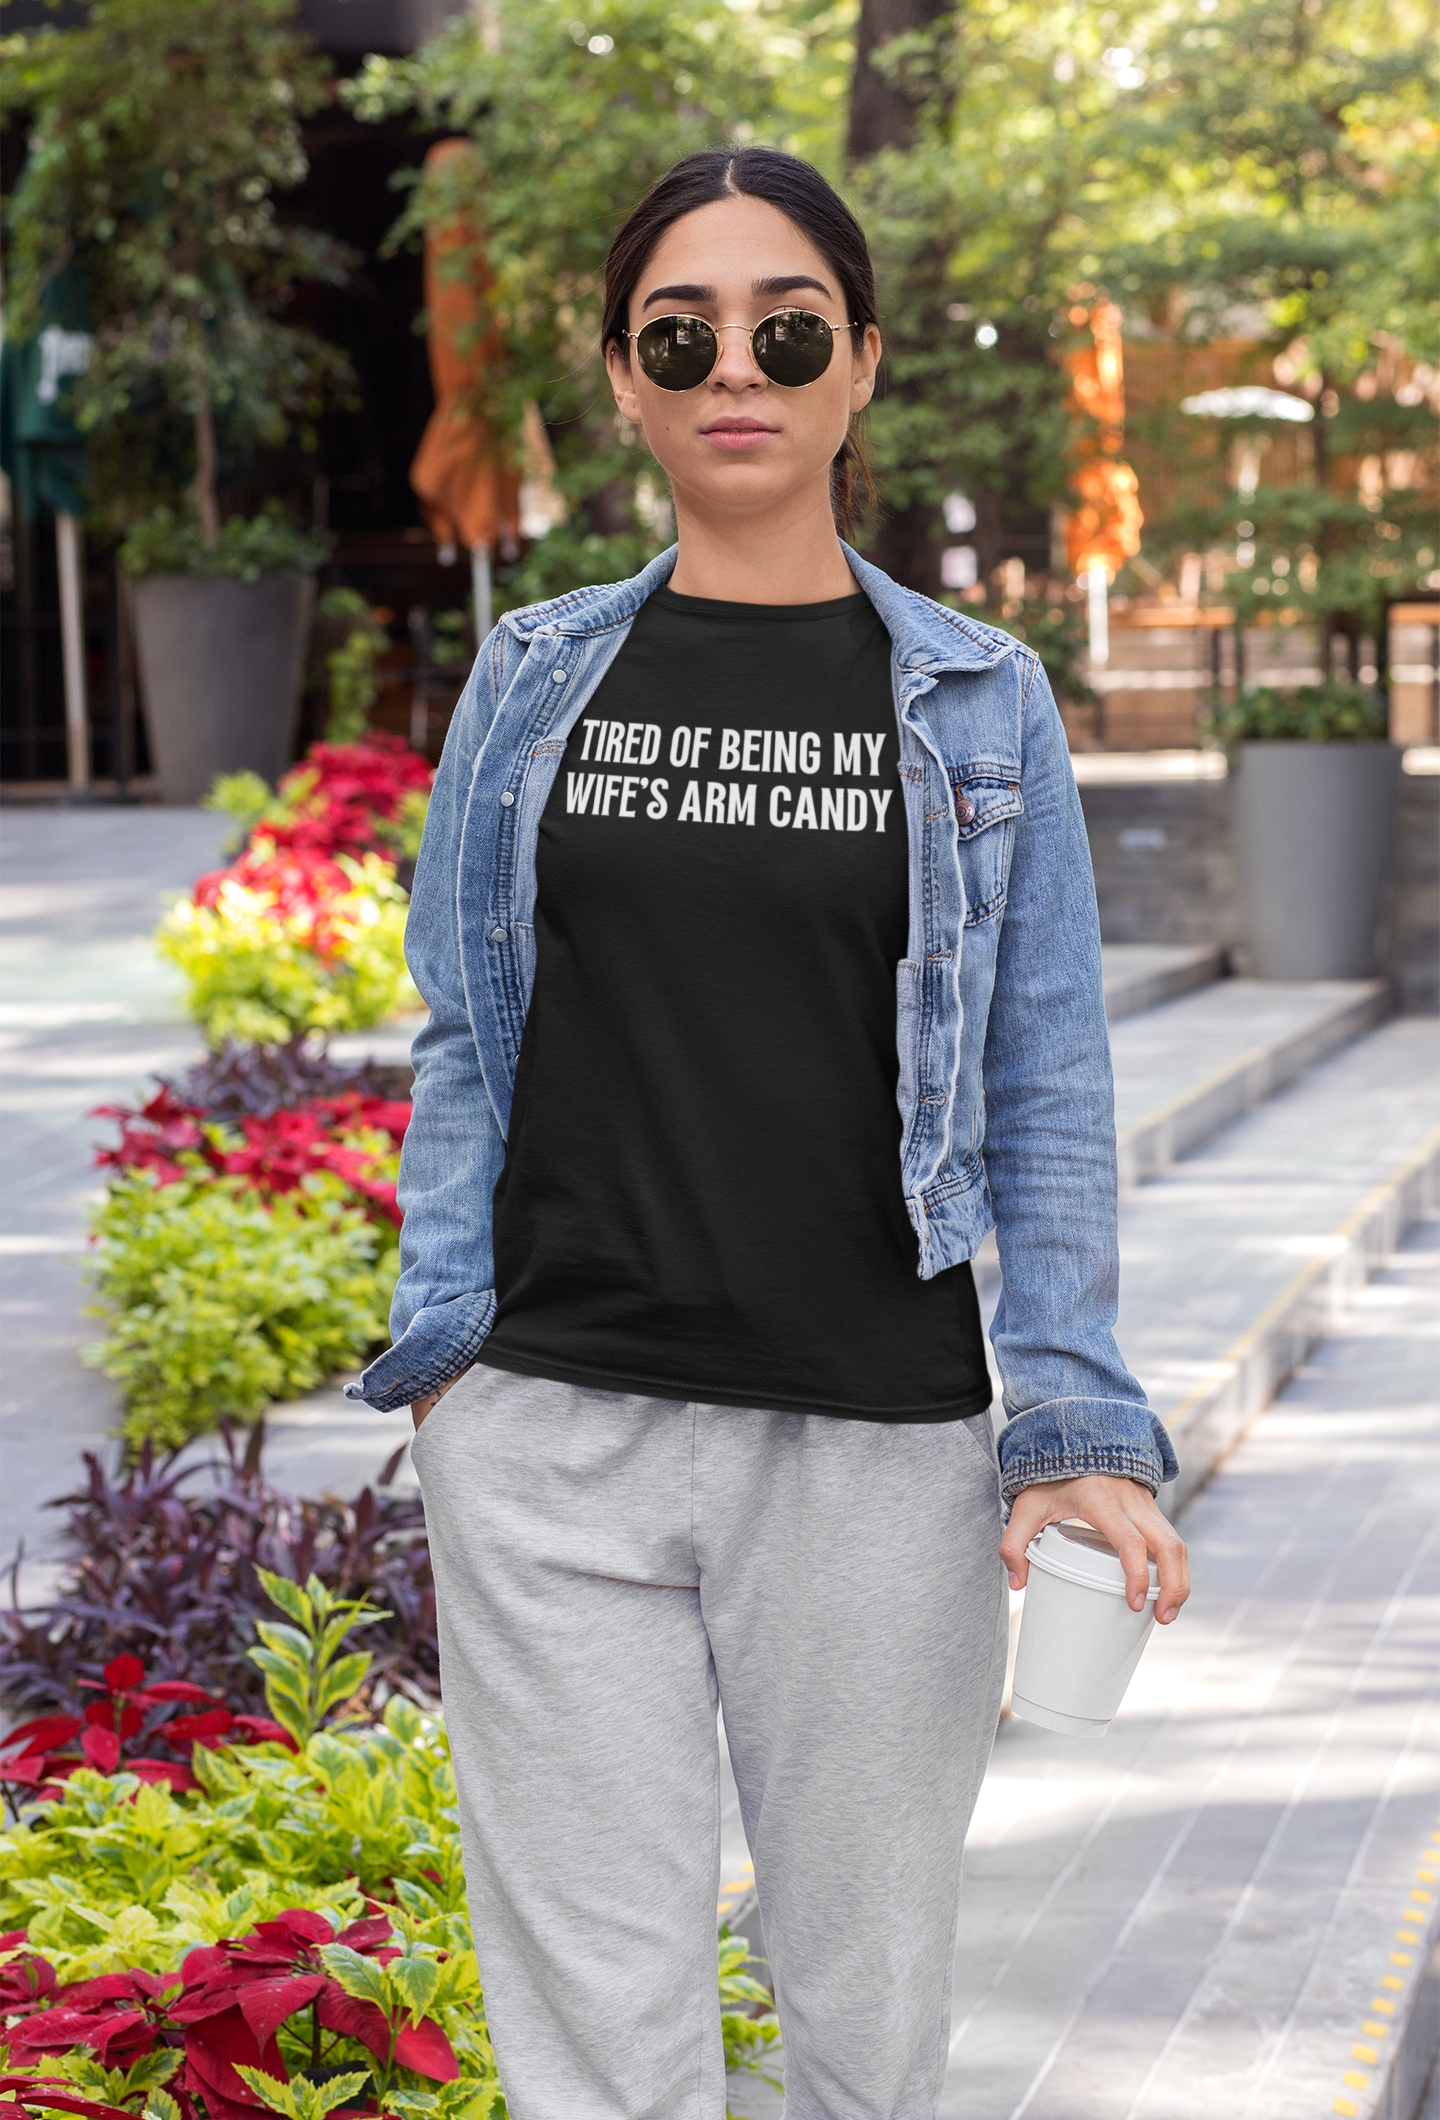 Women's Tired of Being My Wife's Arm Candy Black T-Shirts